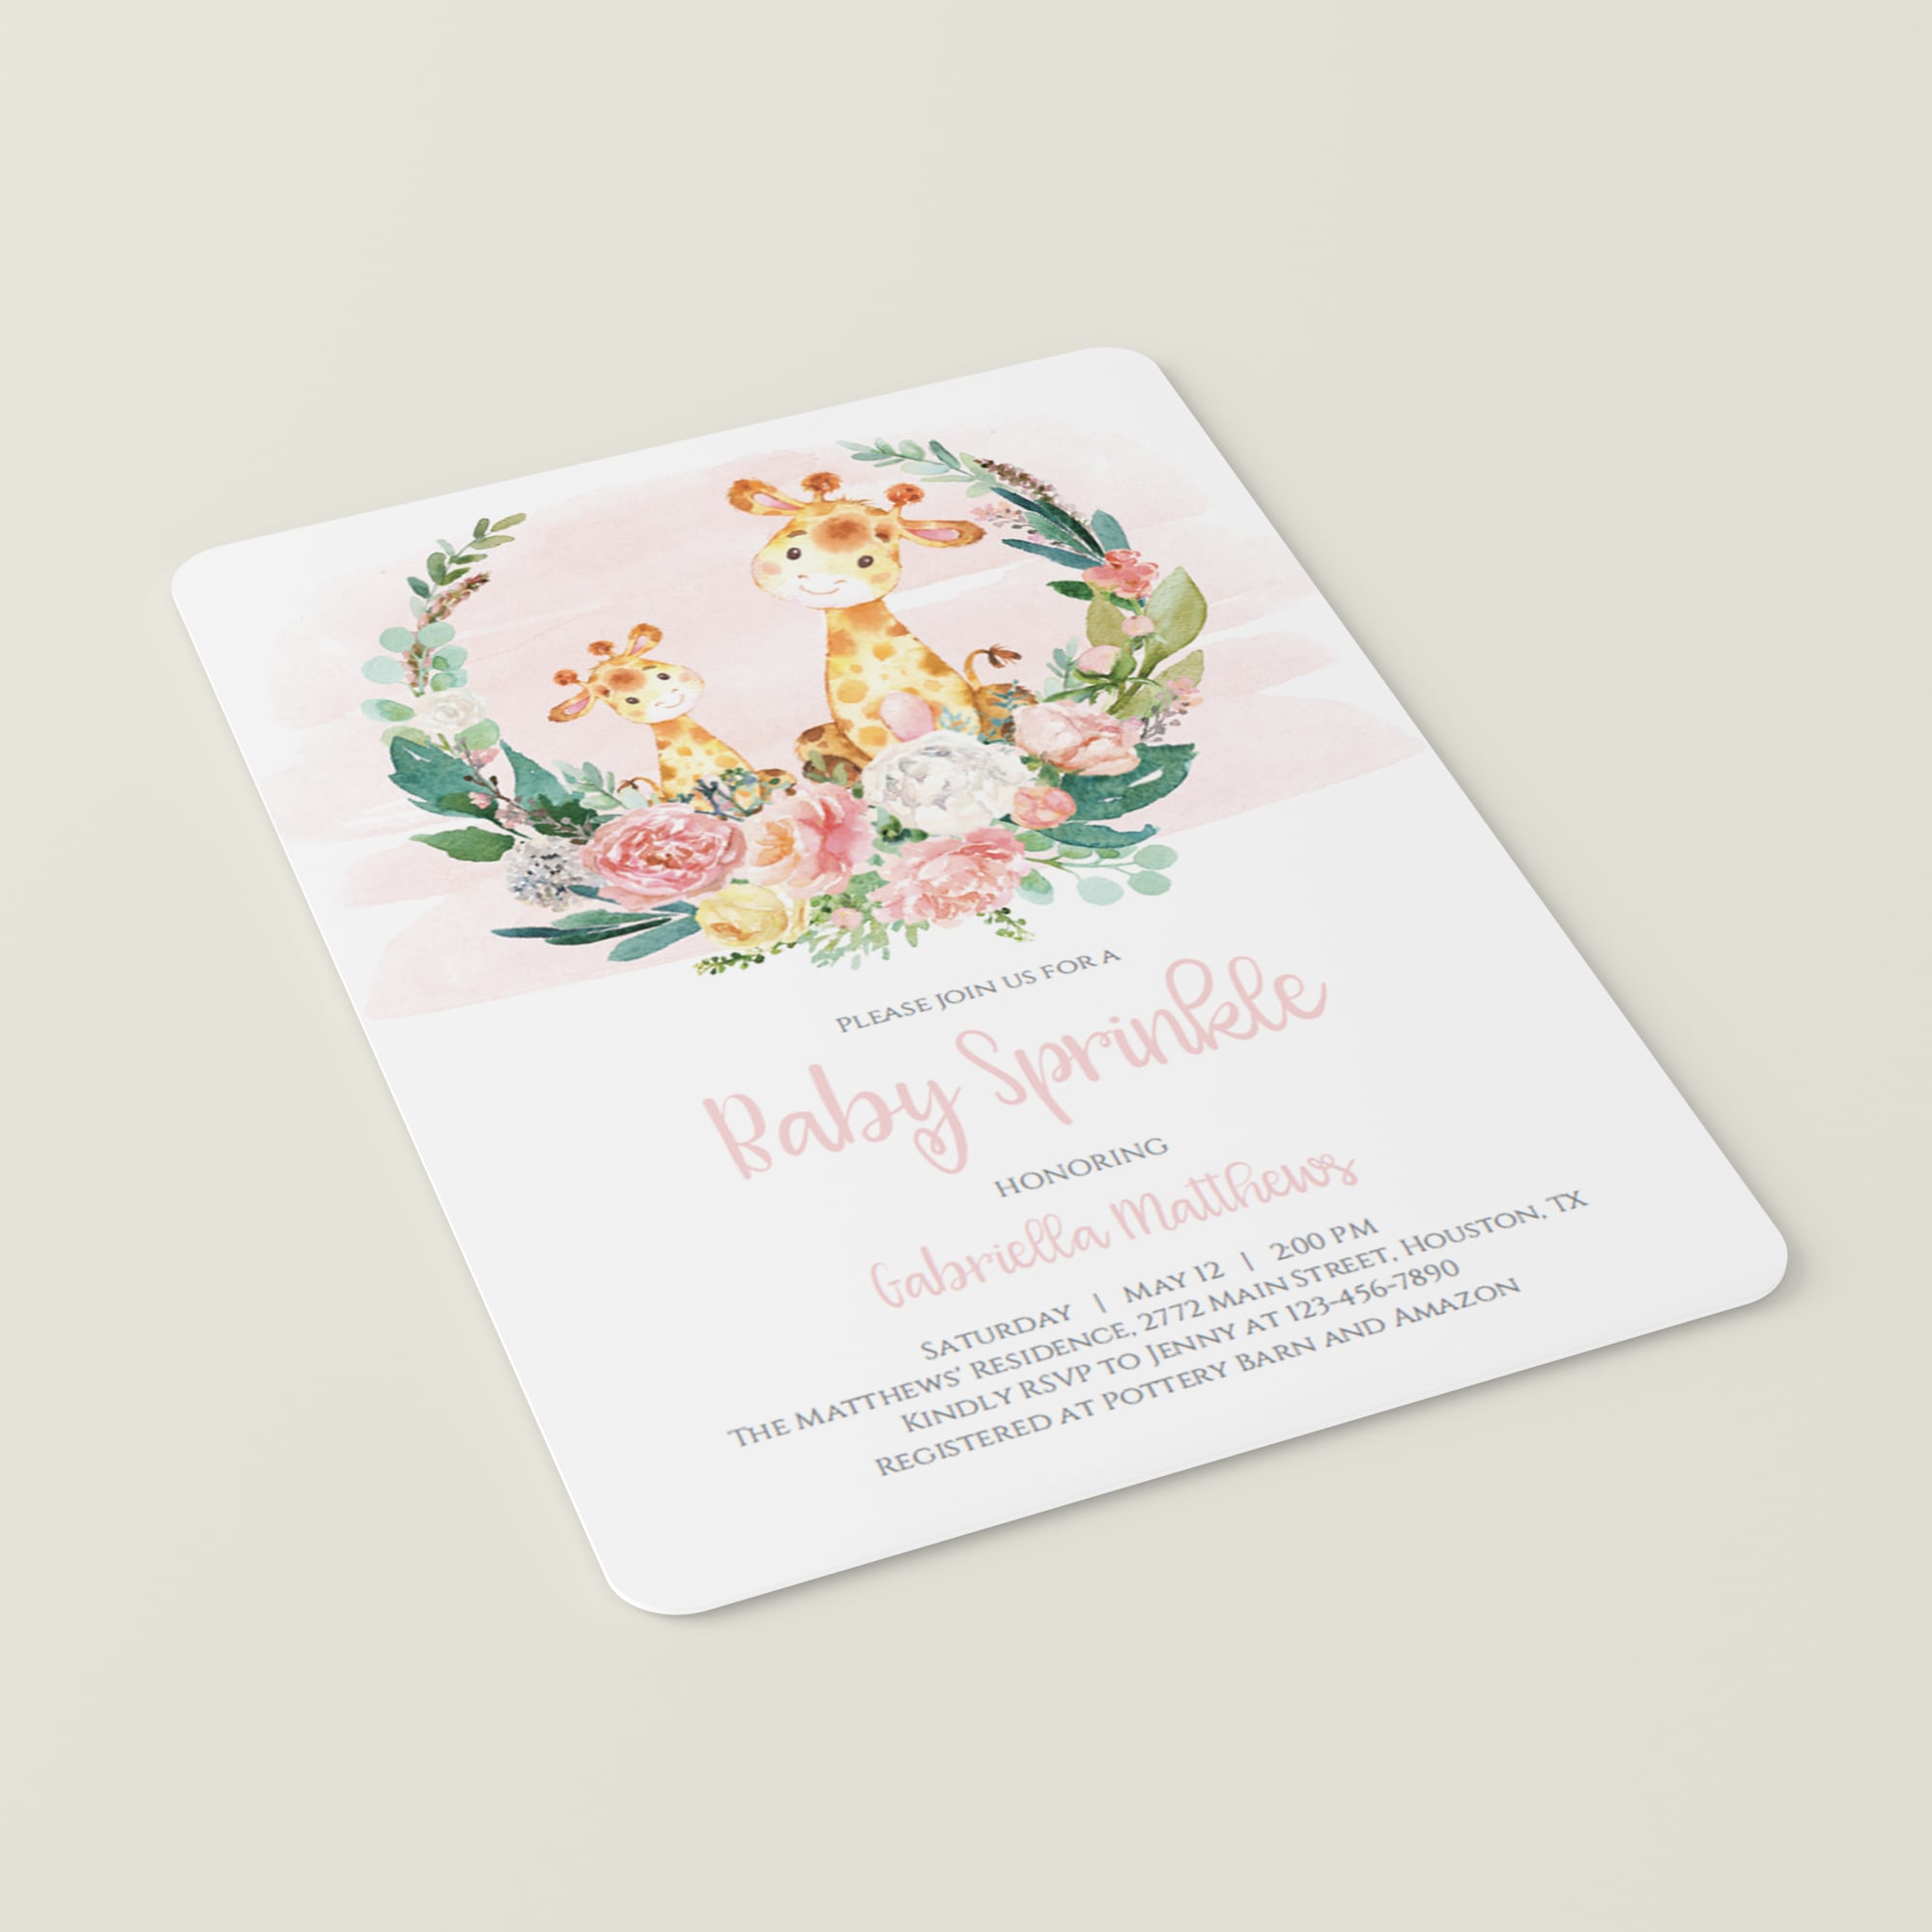 Watercolor floral giraffe baby sprinkle invitations by LittleSizzle